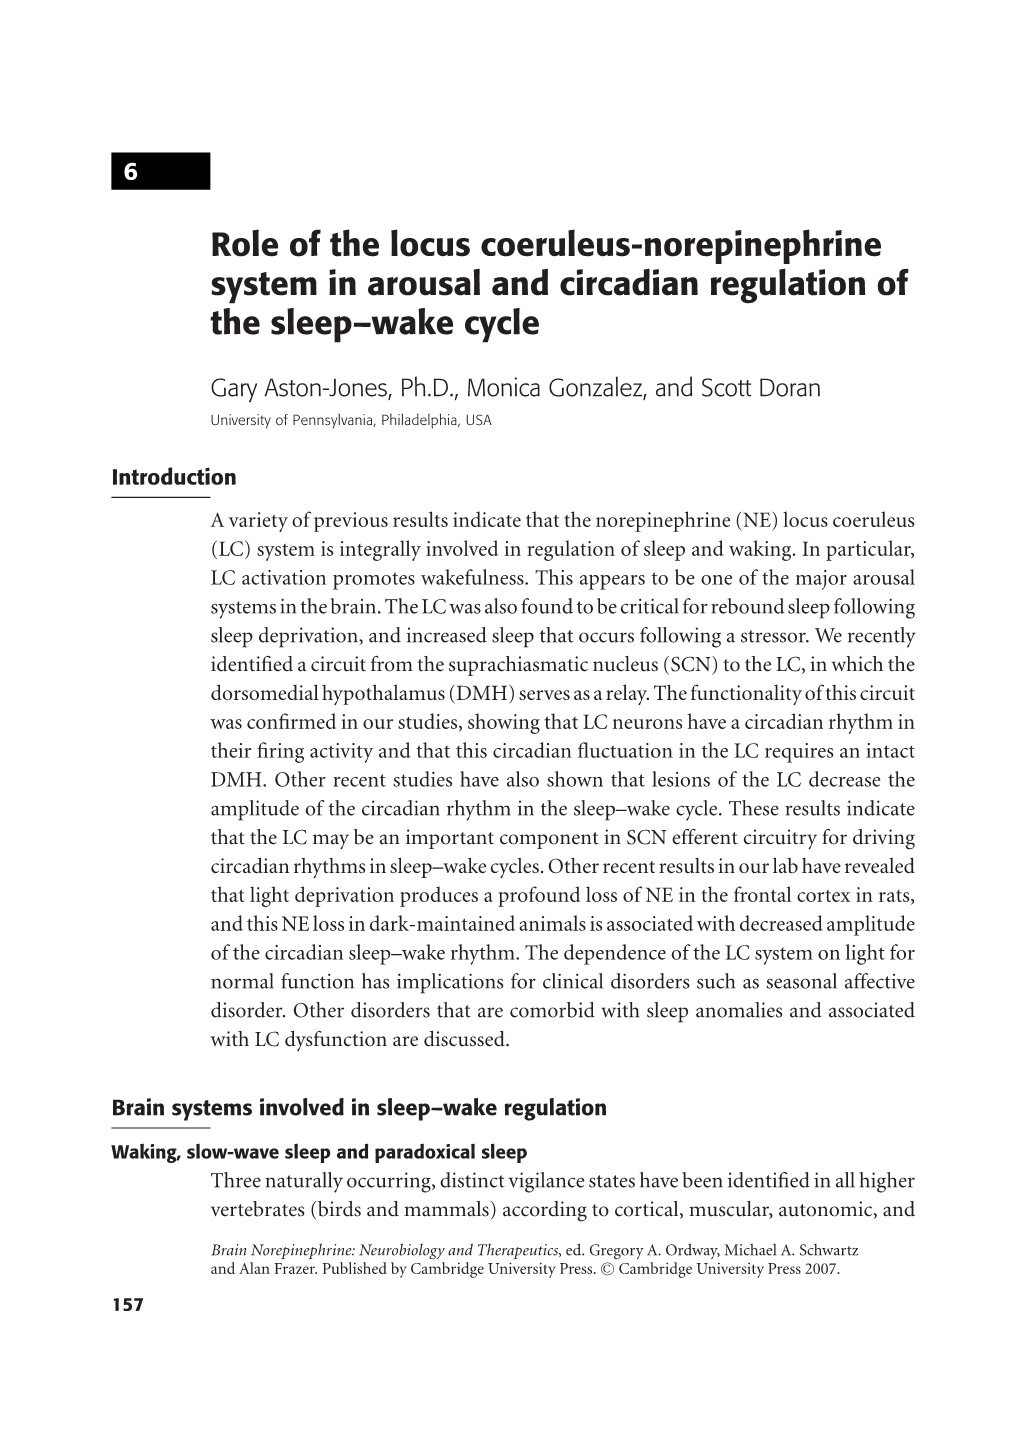 Role of the Locus Coeruleus-Norepinephrine System in Arousal and Circadian Regulation of the Sleep–Wake Cycle